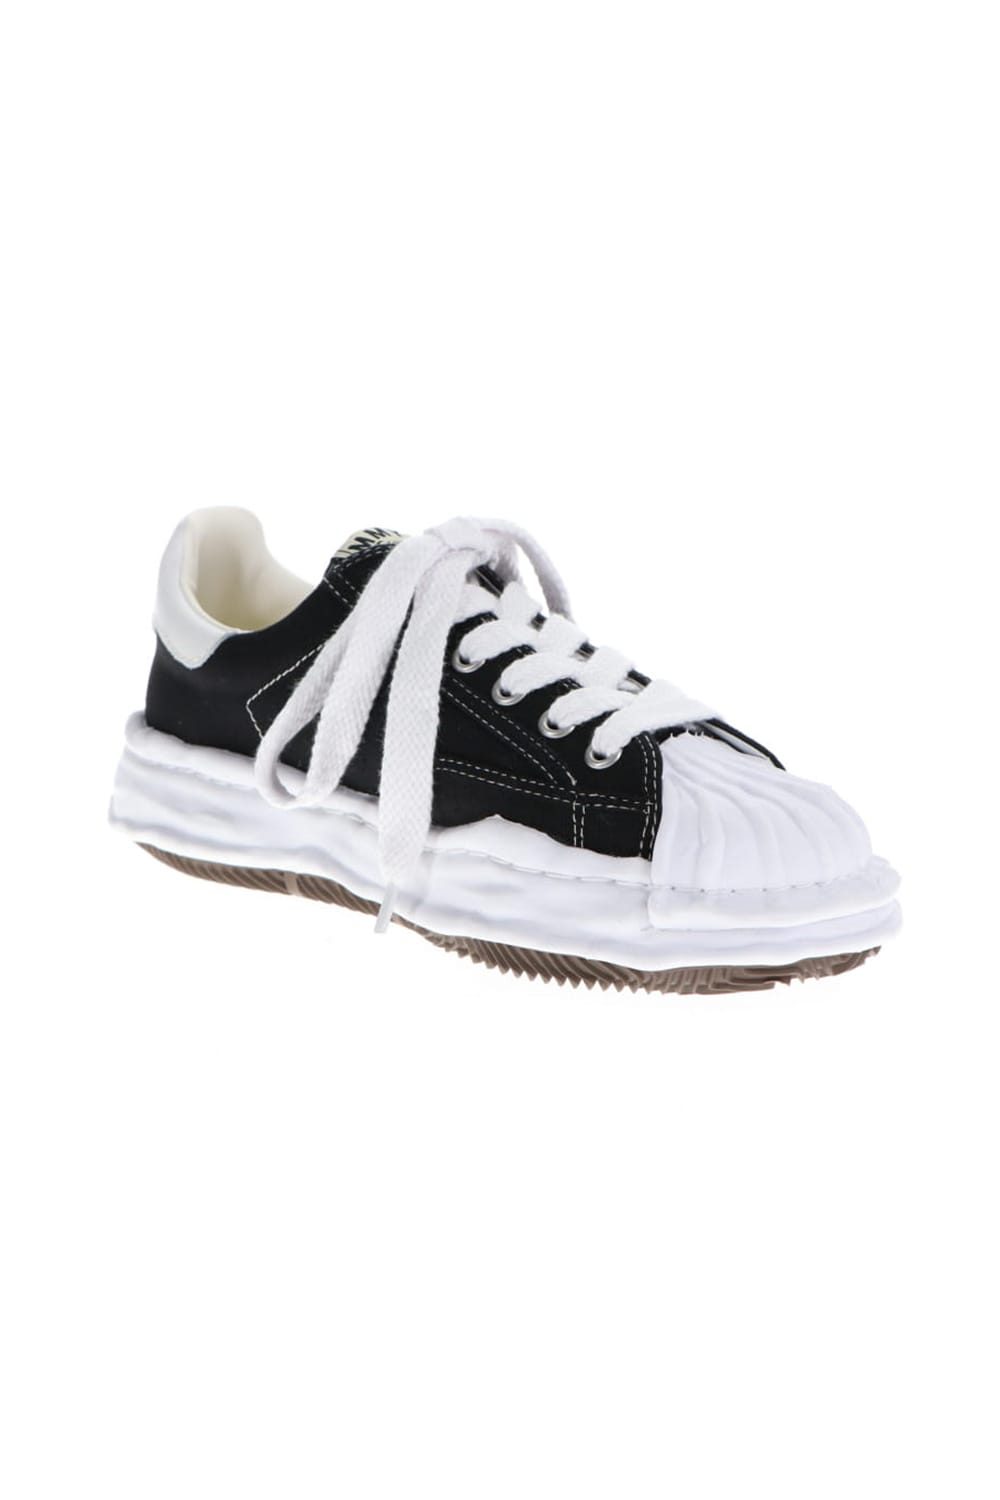 -BLAKEY Low- Original STC sole canvas Low-cut sneakers Black Delivery November